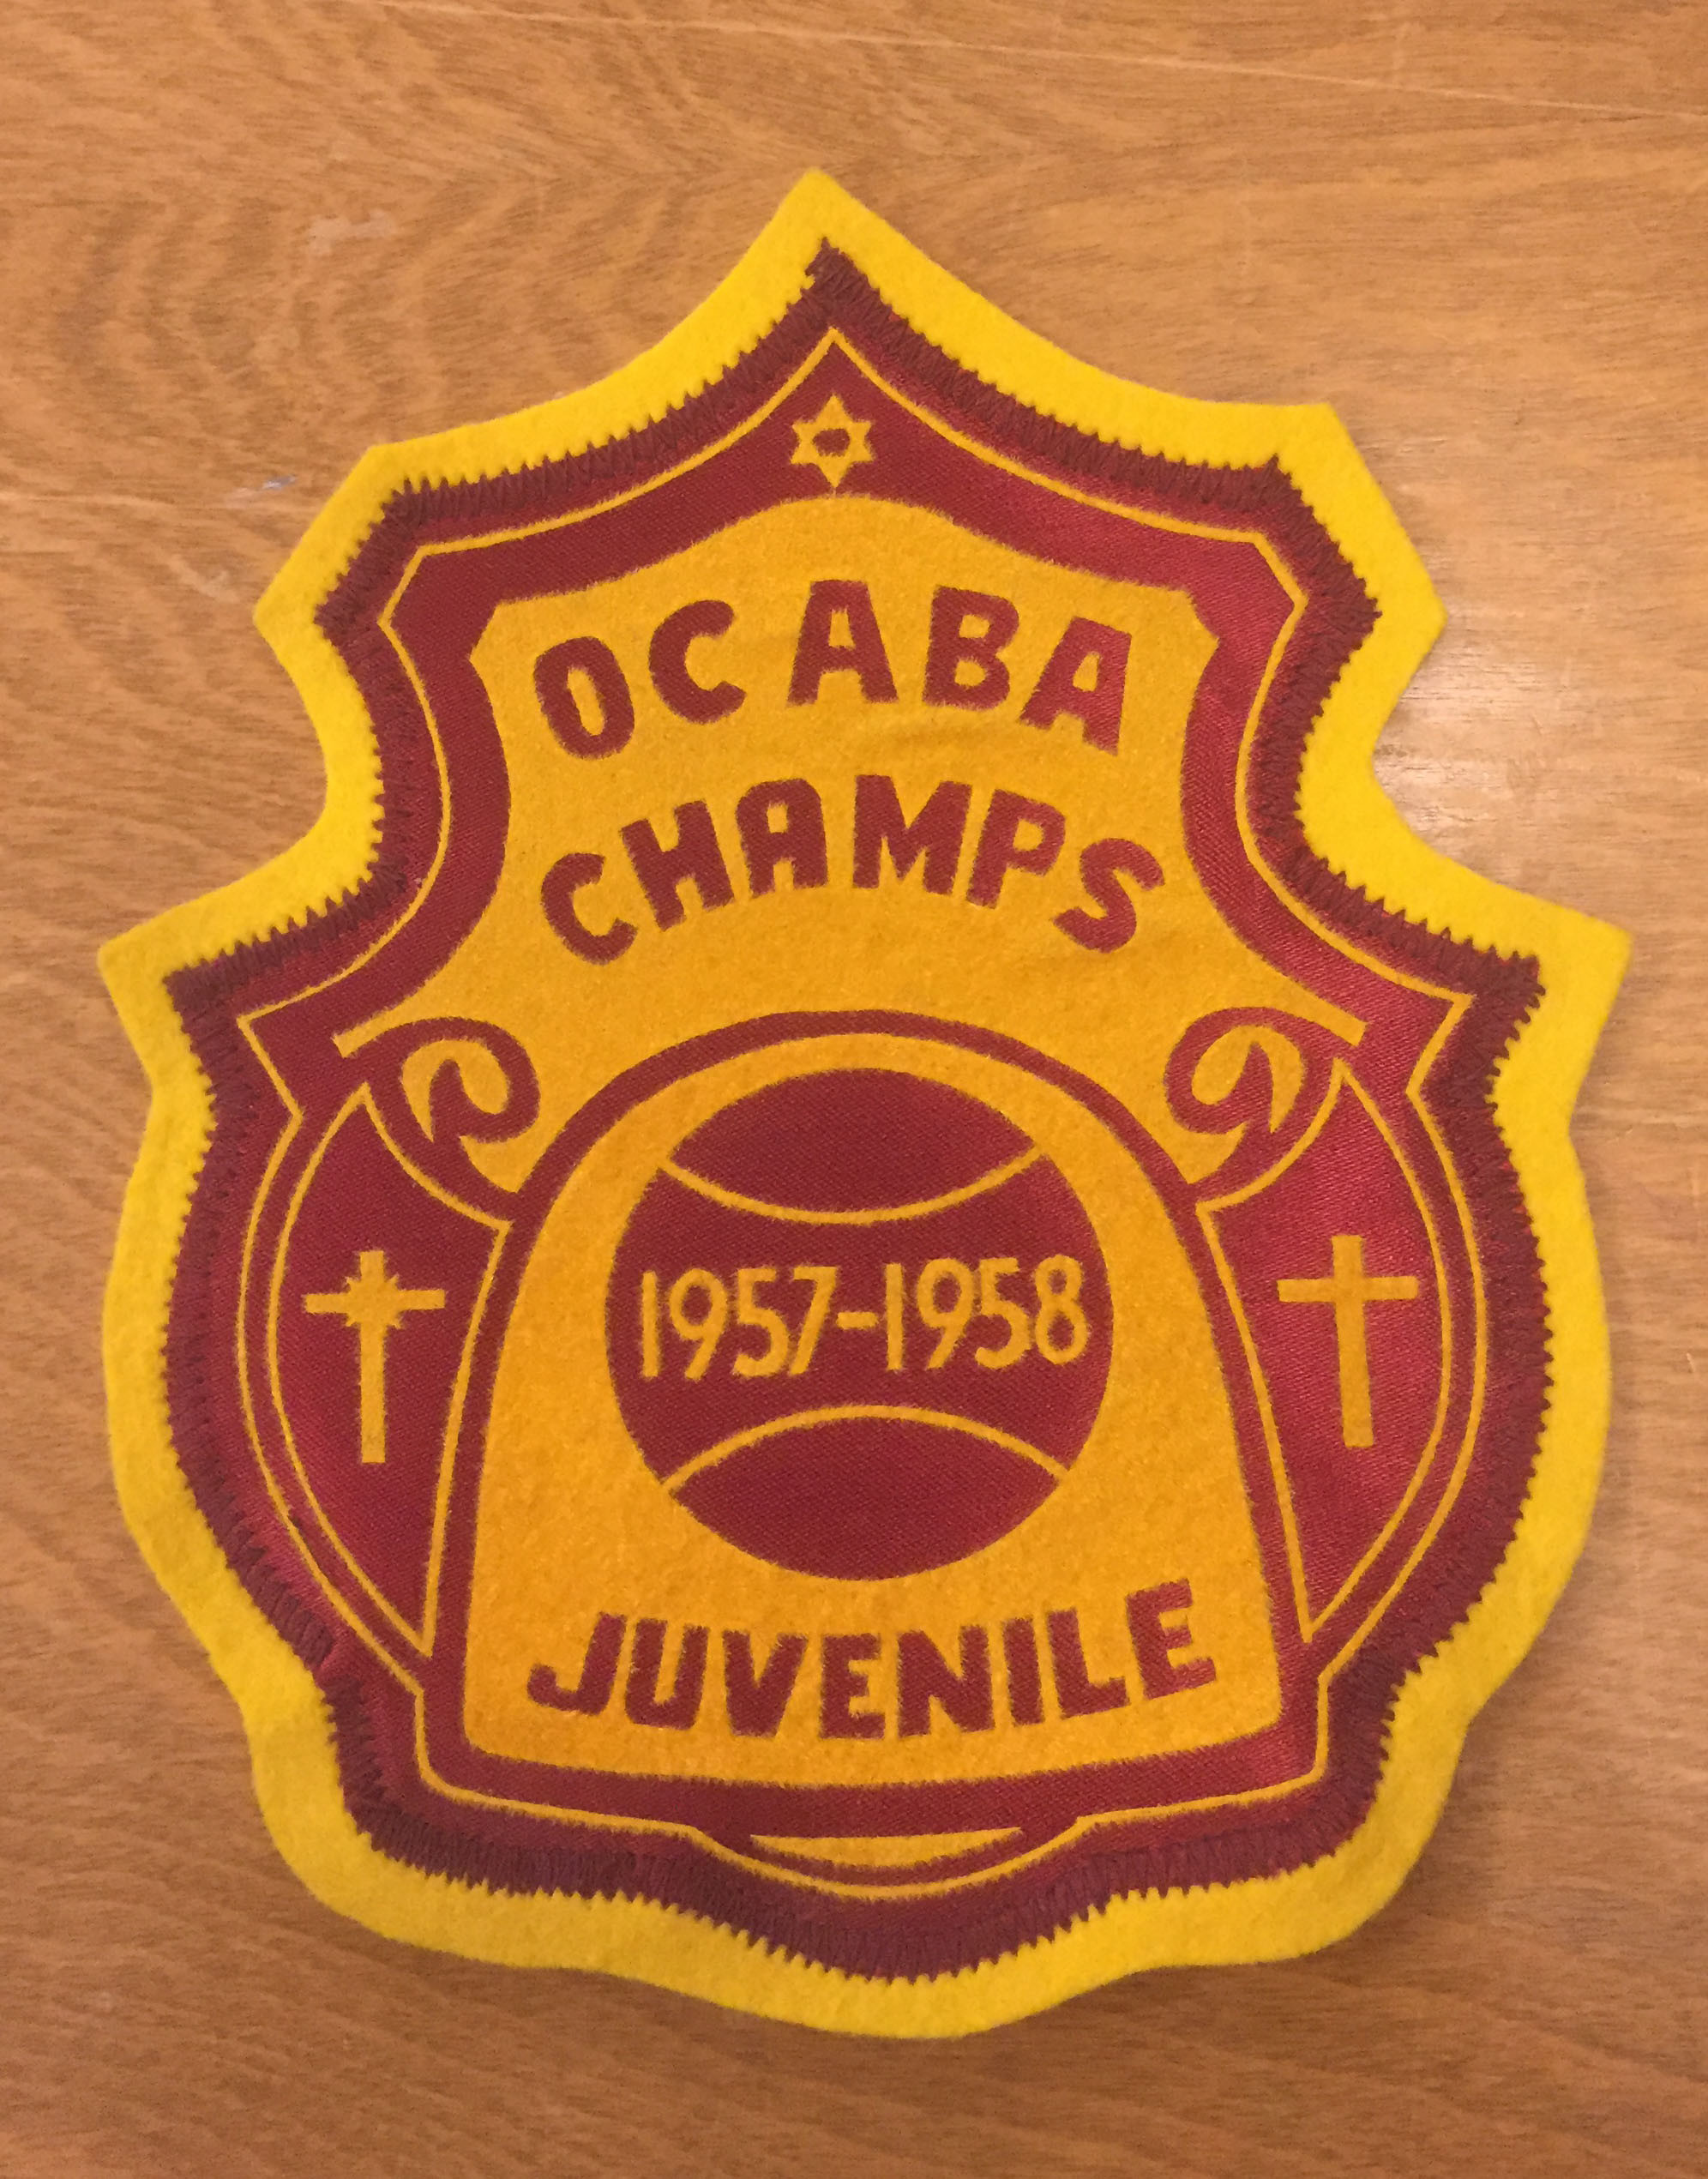 colour%20photo%20of%20St.%20Andrew%27s%20Church%20basketball%20champions%20sports%20patch%2C%201957-58